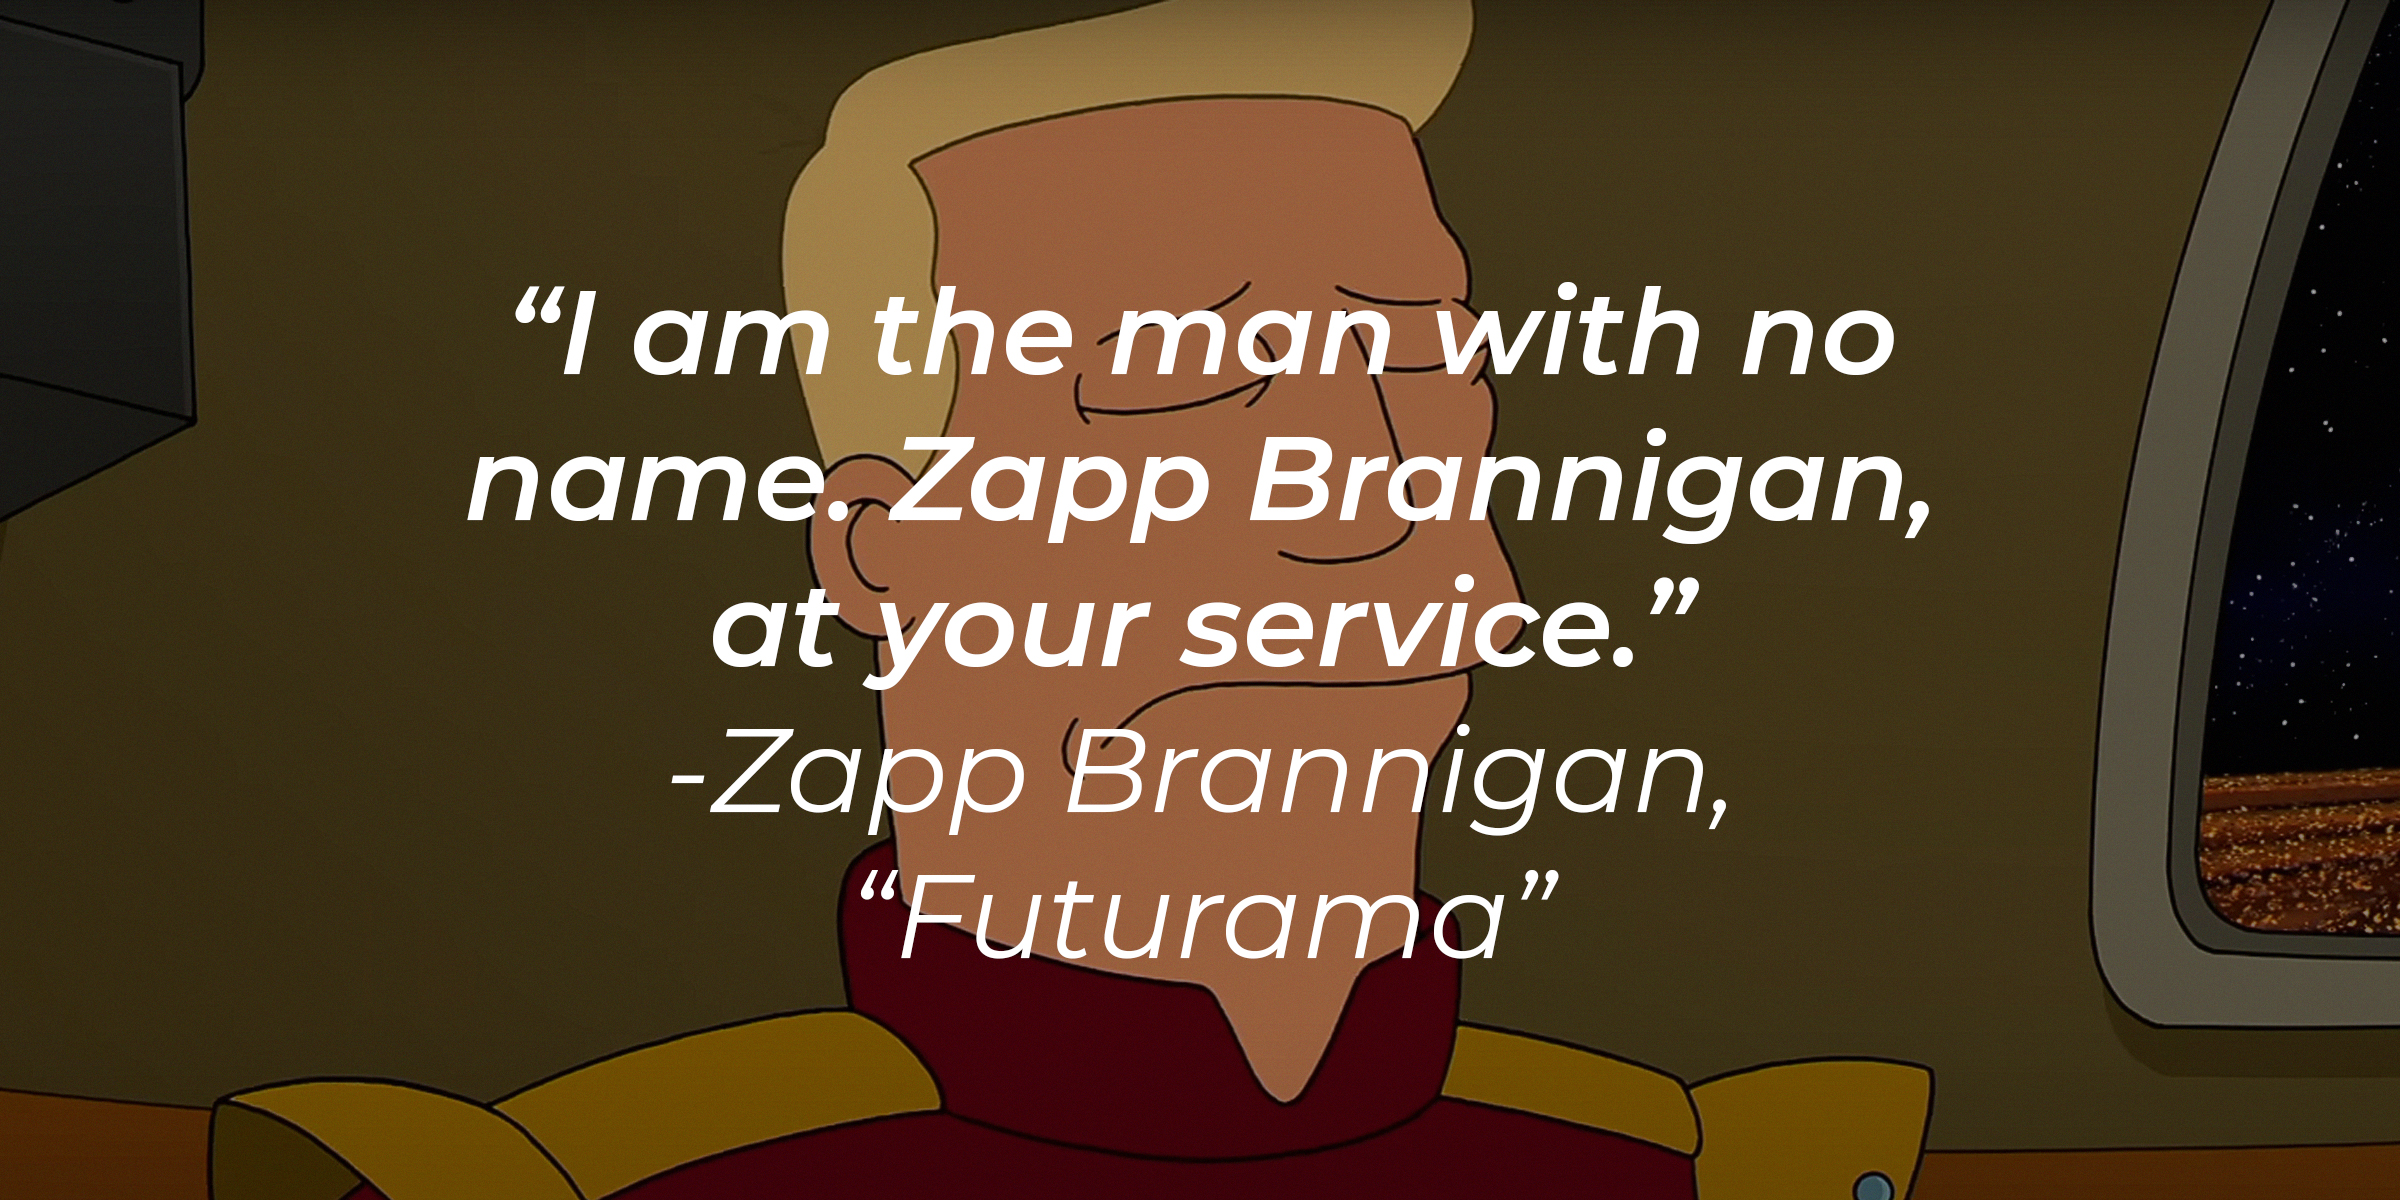 Zapp Brannigan's quote: "I am the man with no name. Zapp Brannigan, at your service." | Source: YouTube/adultswim